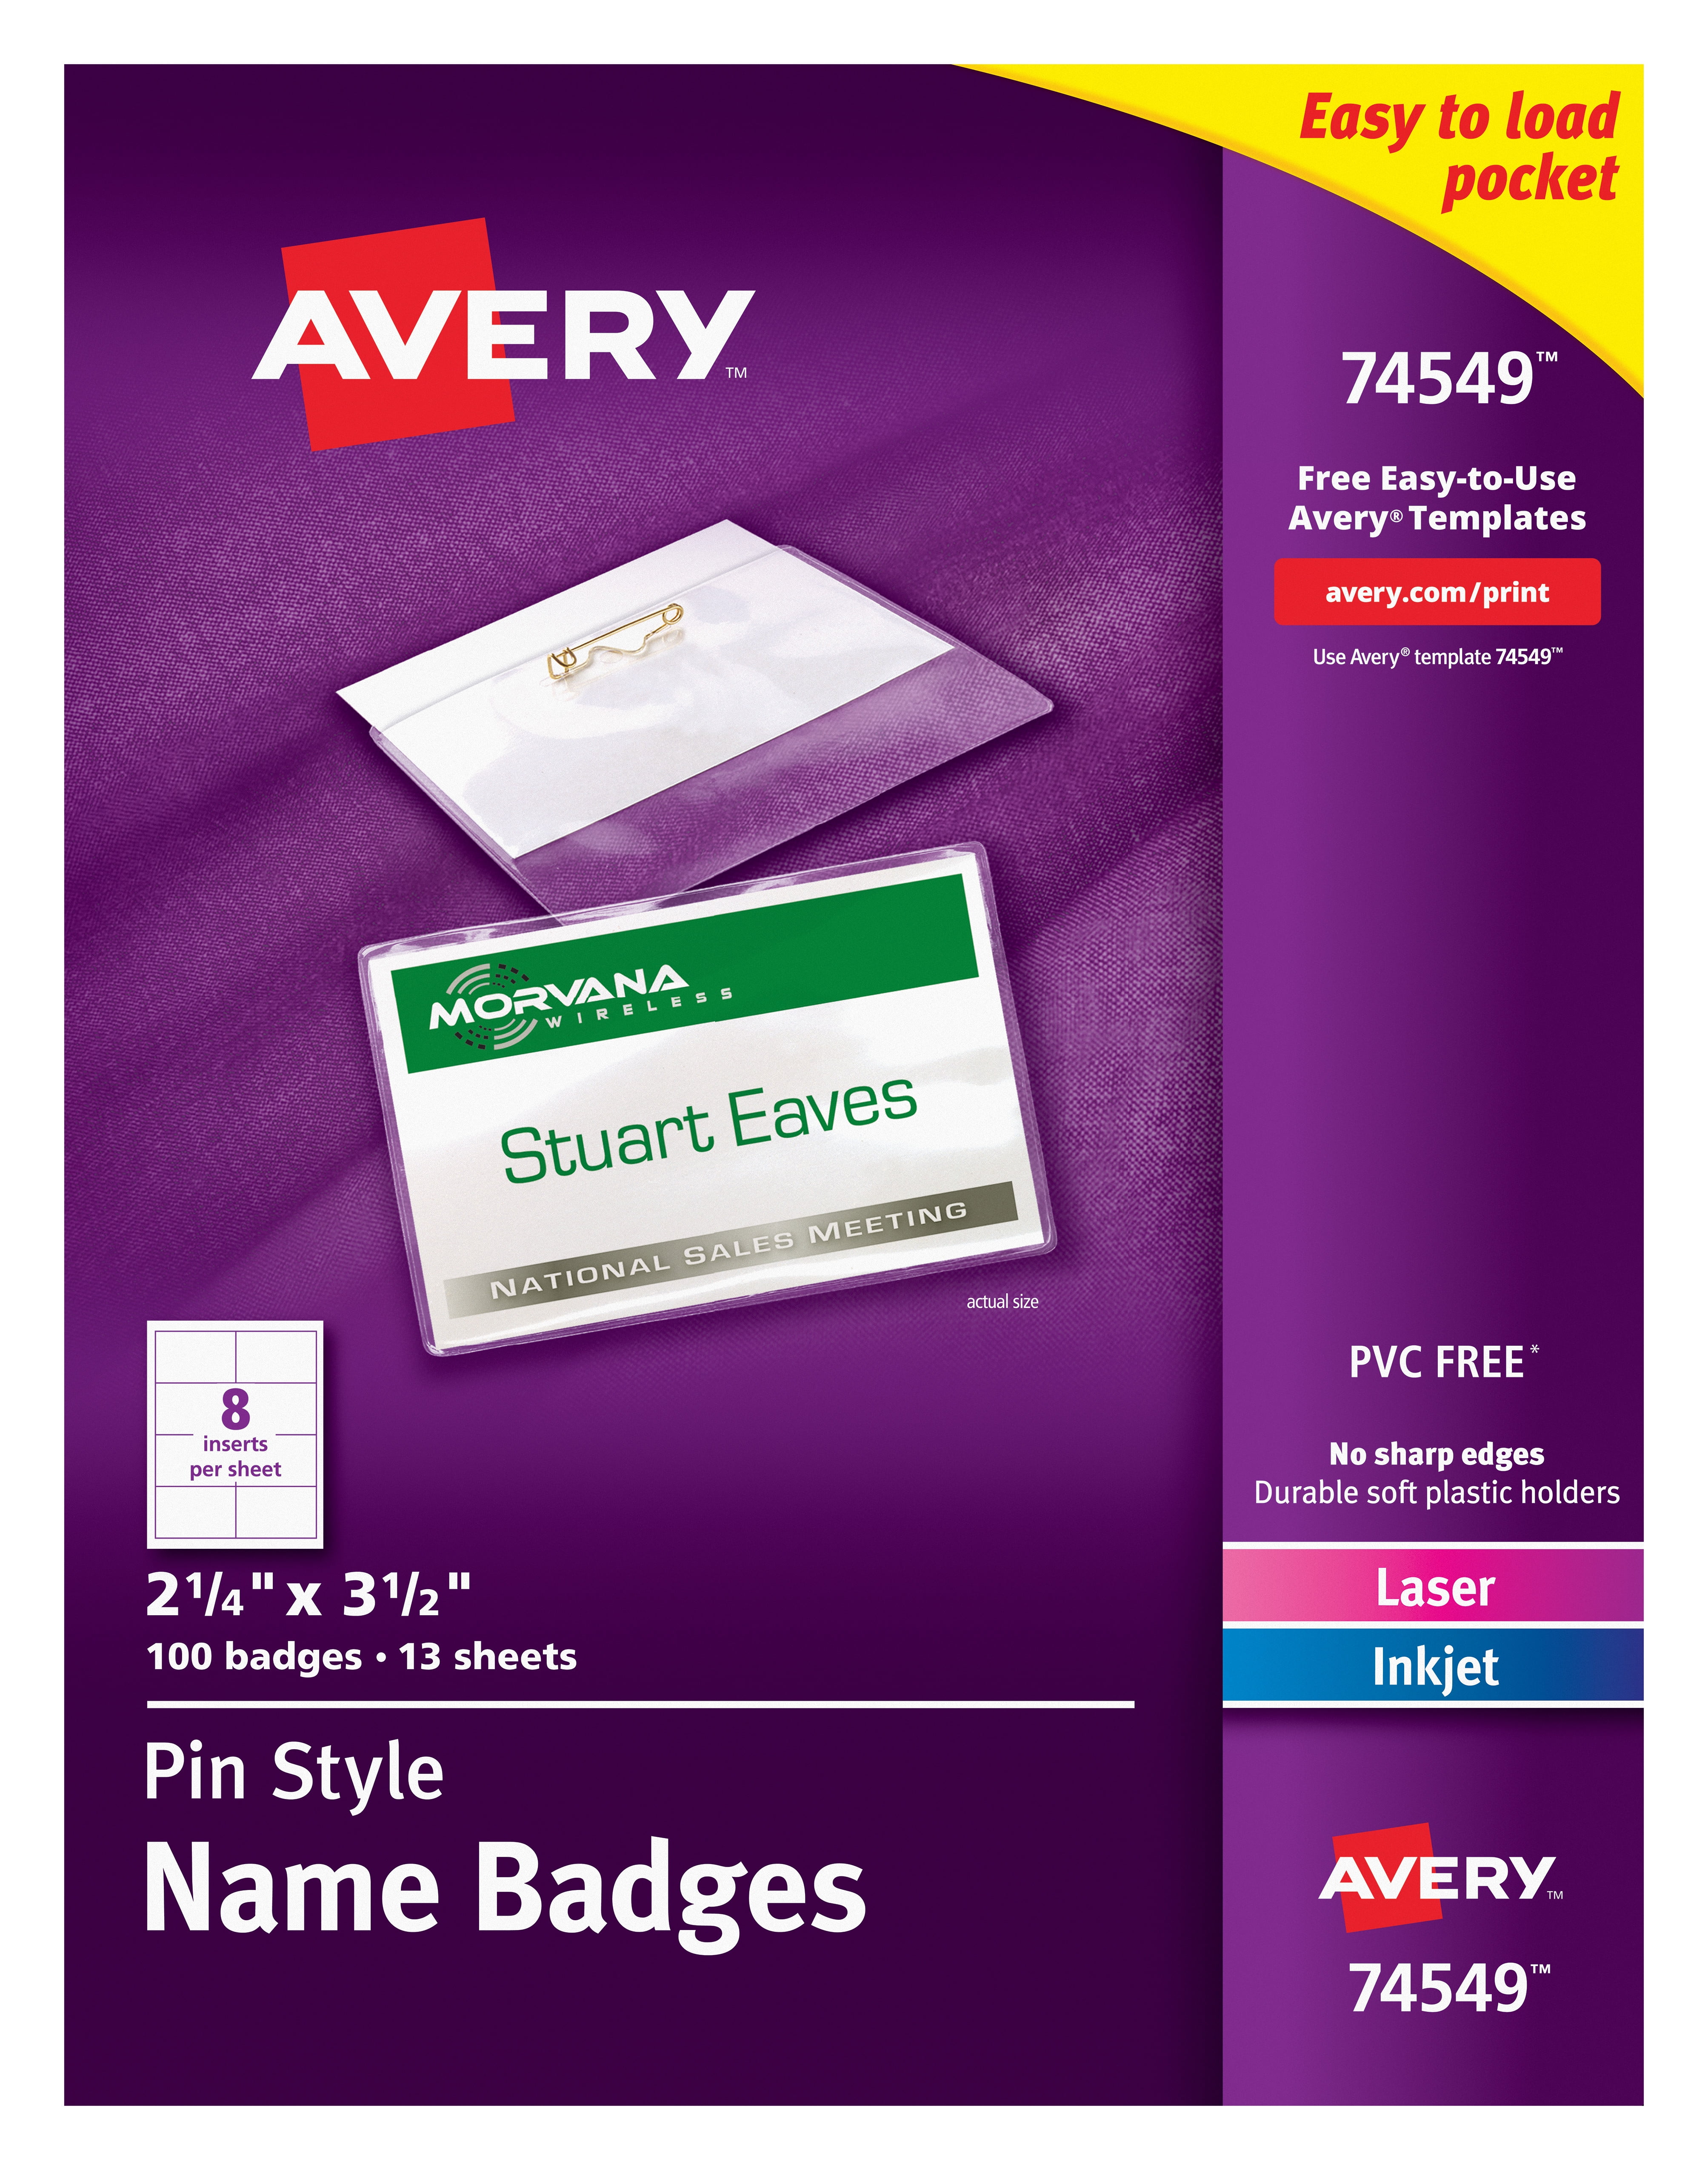 avery-pin-style-name-badges-2-1-4-x-3-1-2-100-badges-74549